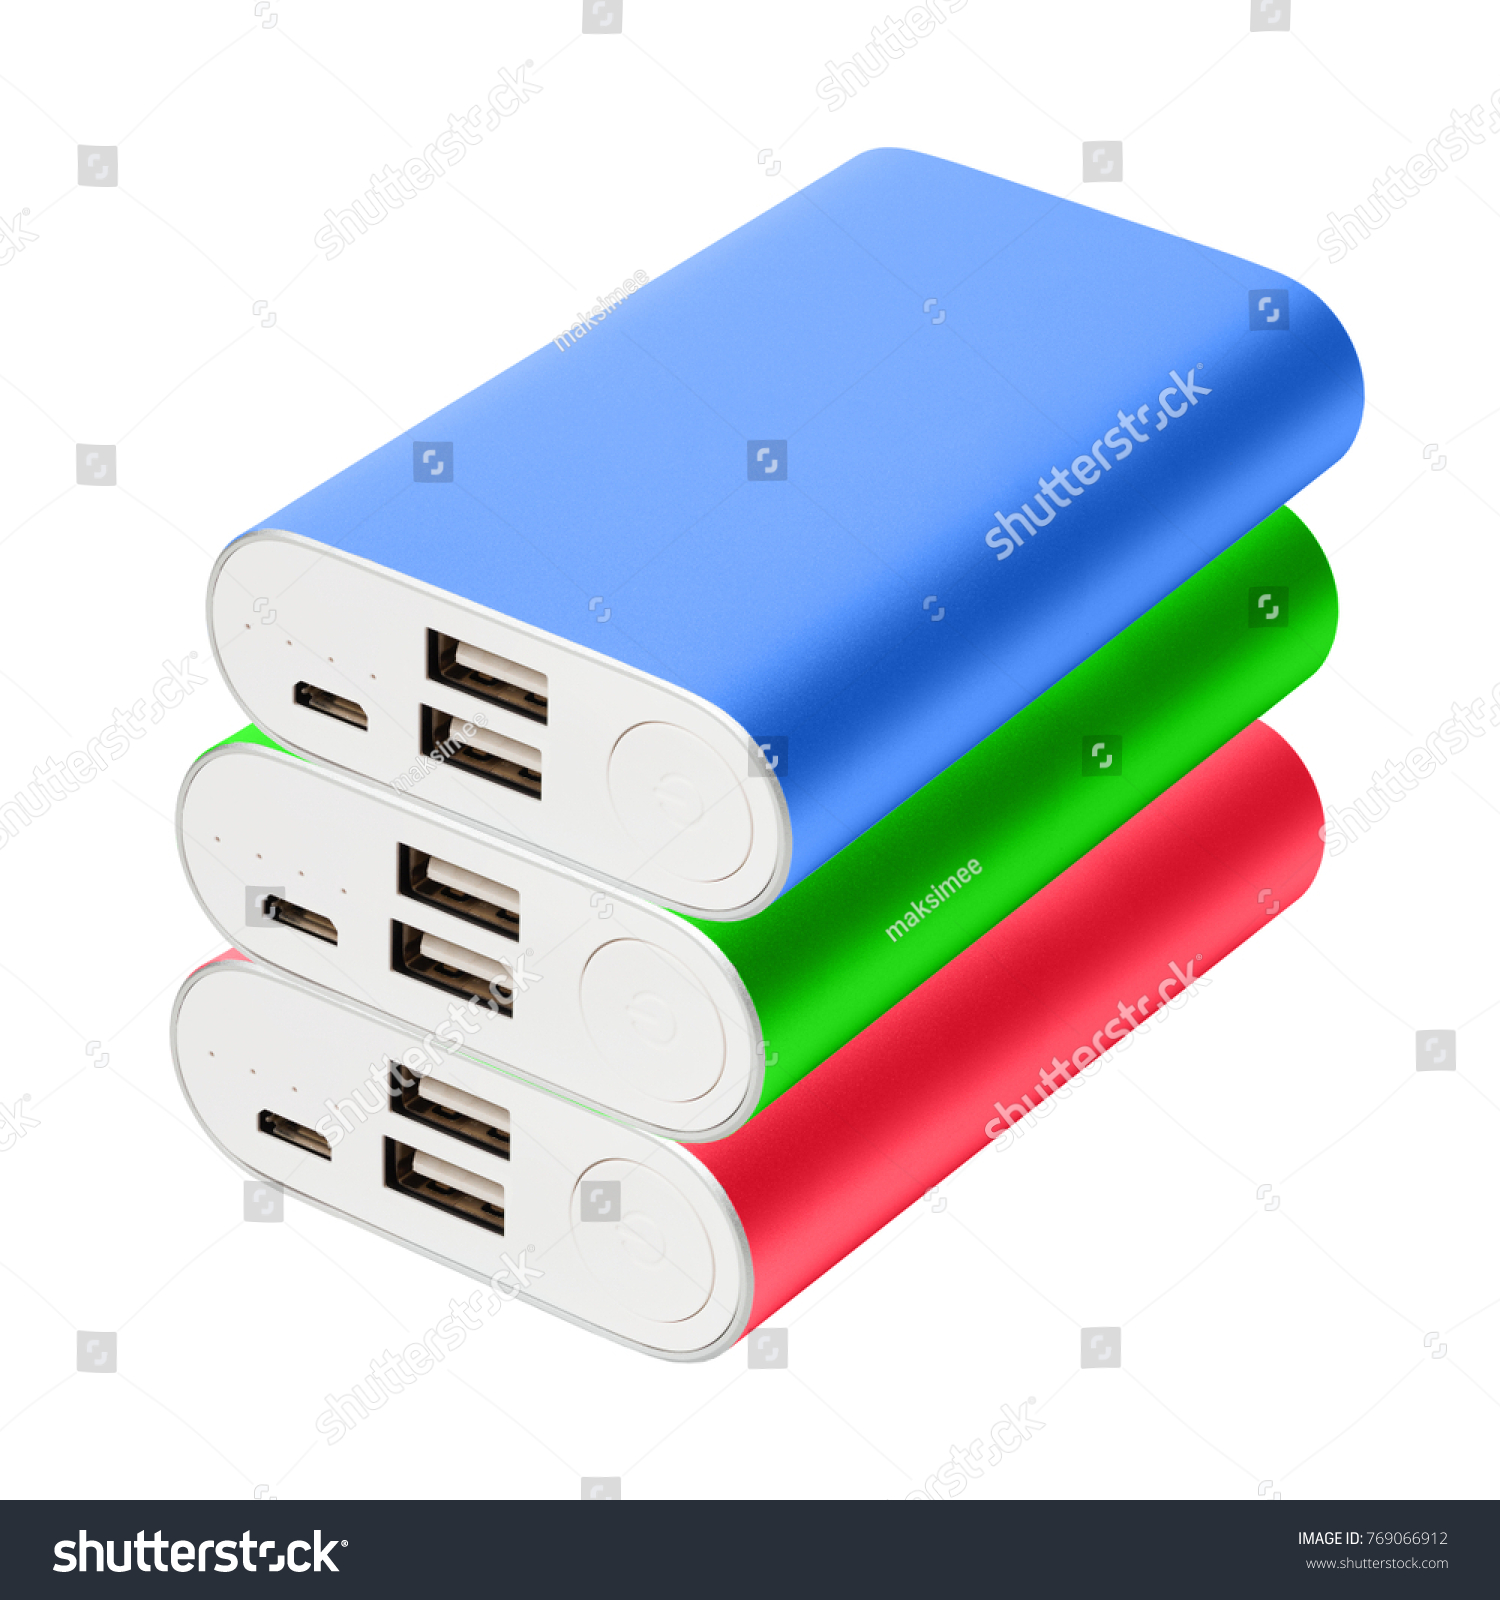 Three color portable chargers lie on one on one isolated on white background.  Green, red, blue powebanks for charging gadgets: phones, tablets, etc.
 #769066912